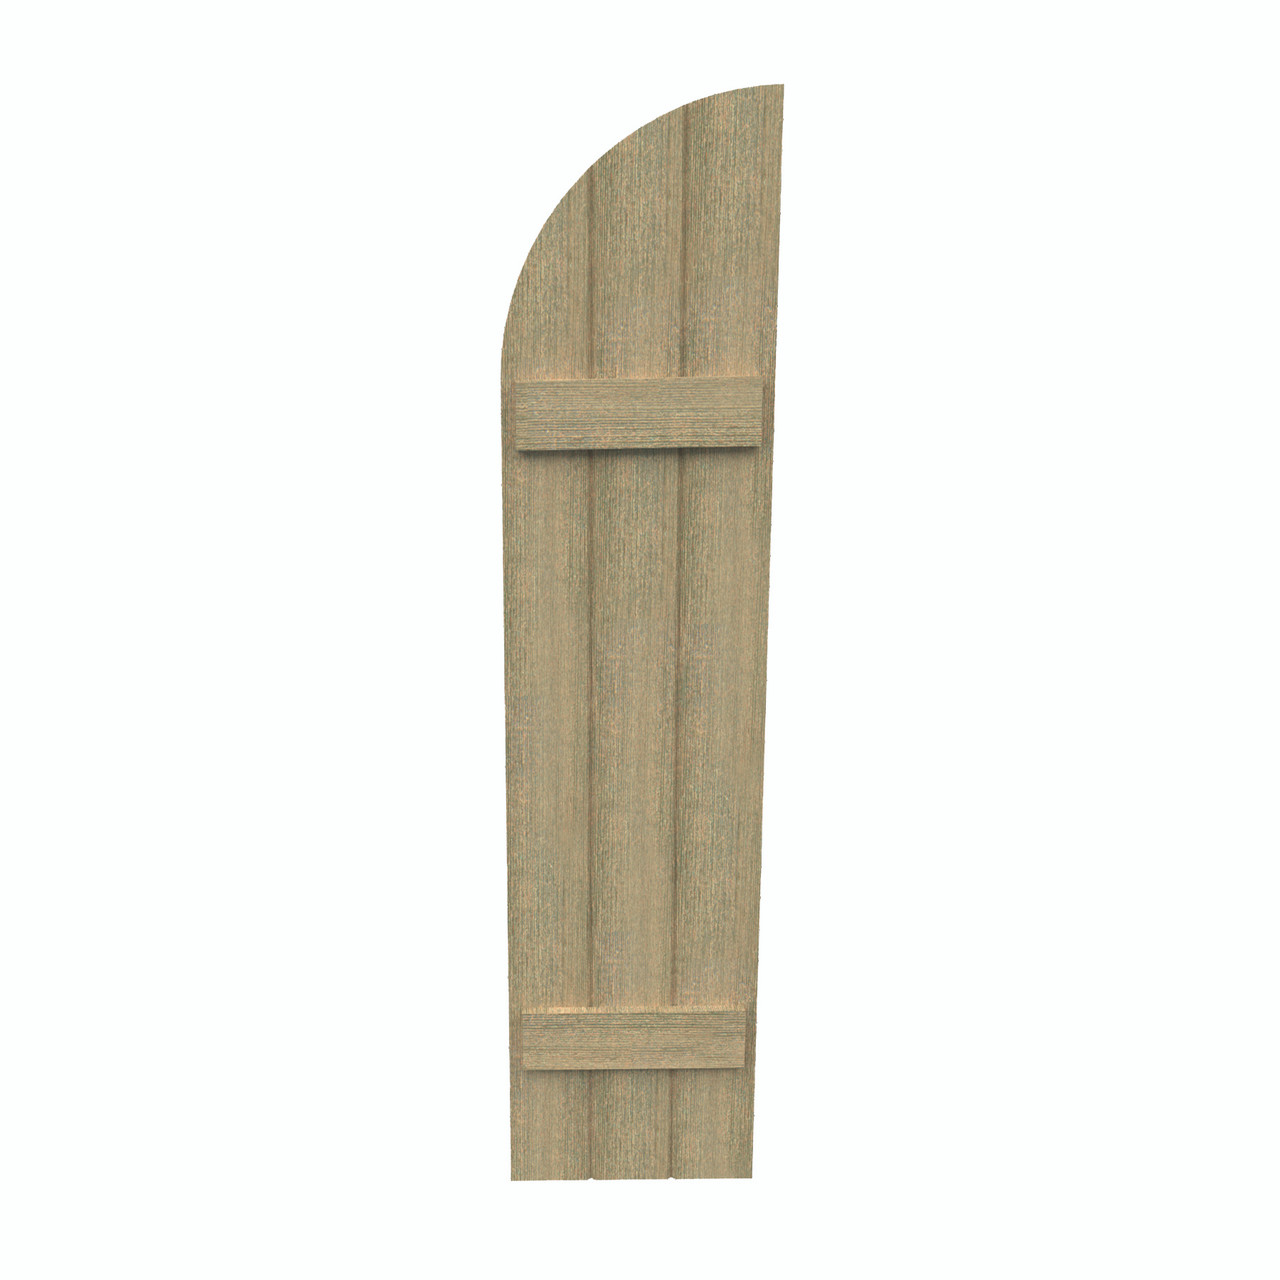 14 inch by 93 inch Quarter Round Shutter with 3-Boards